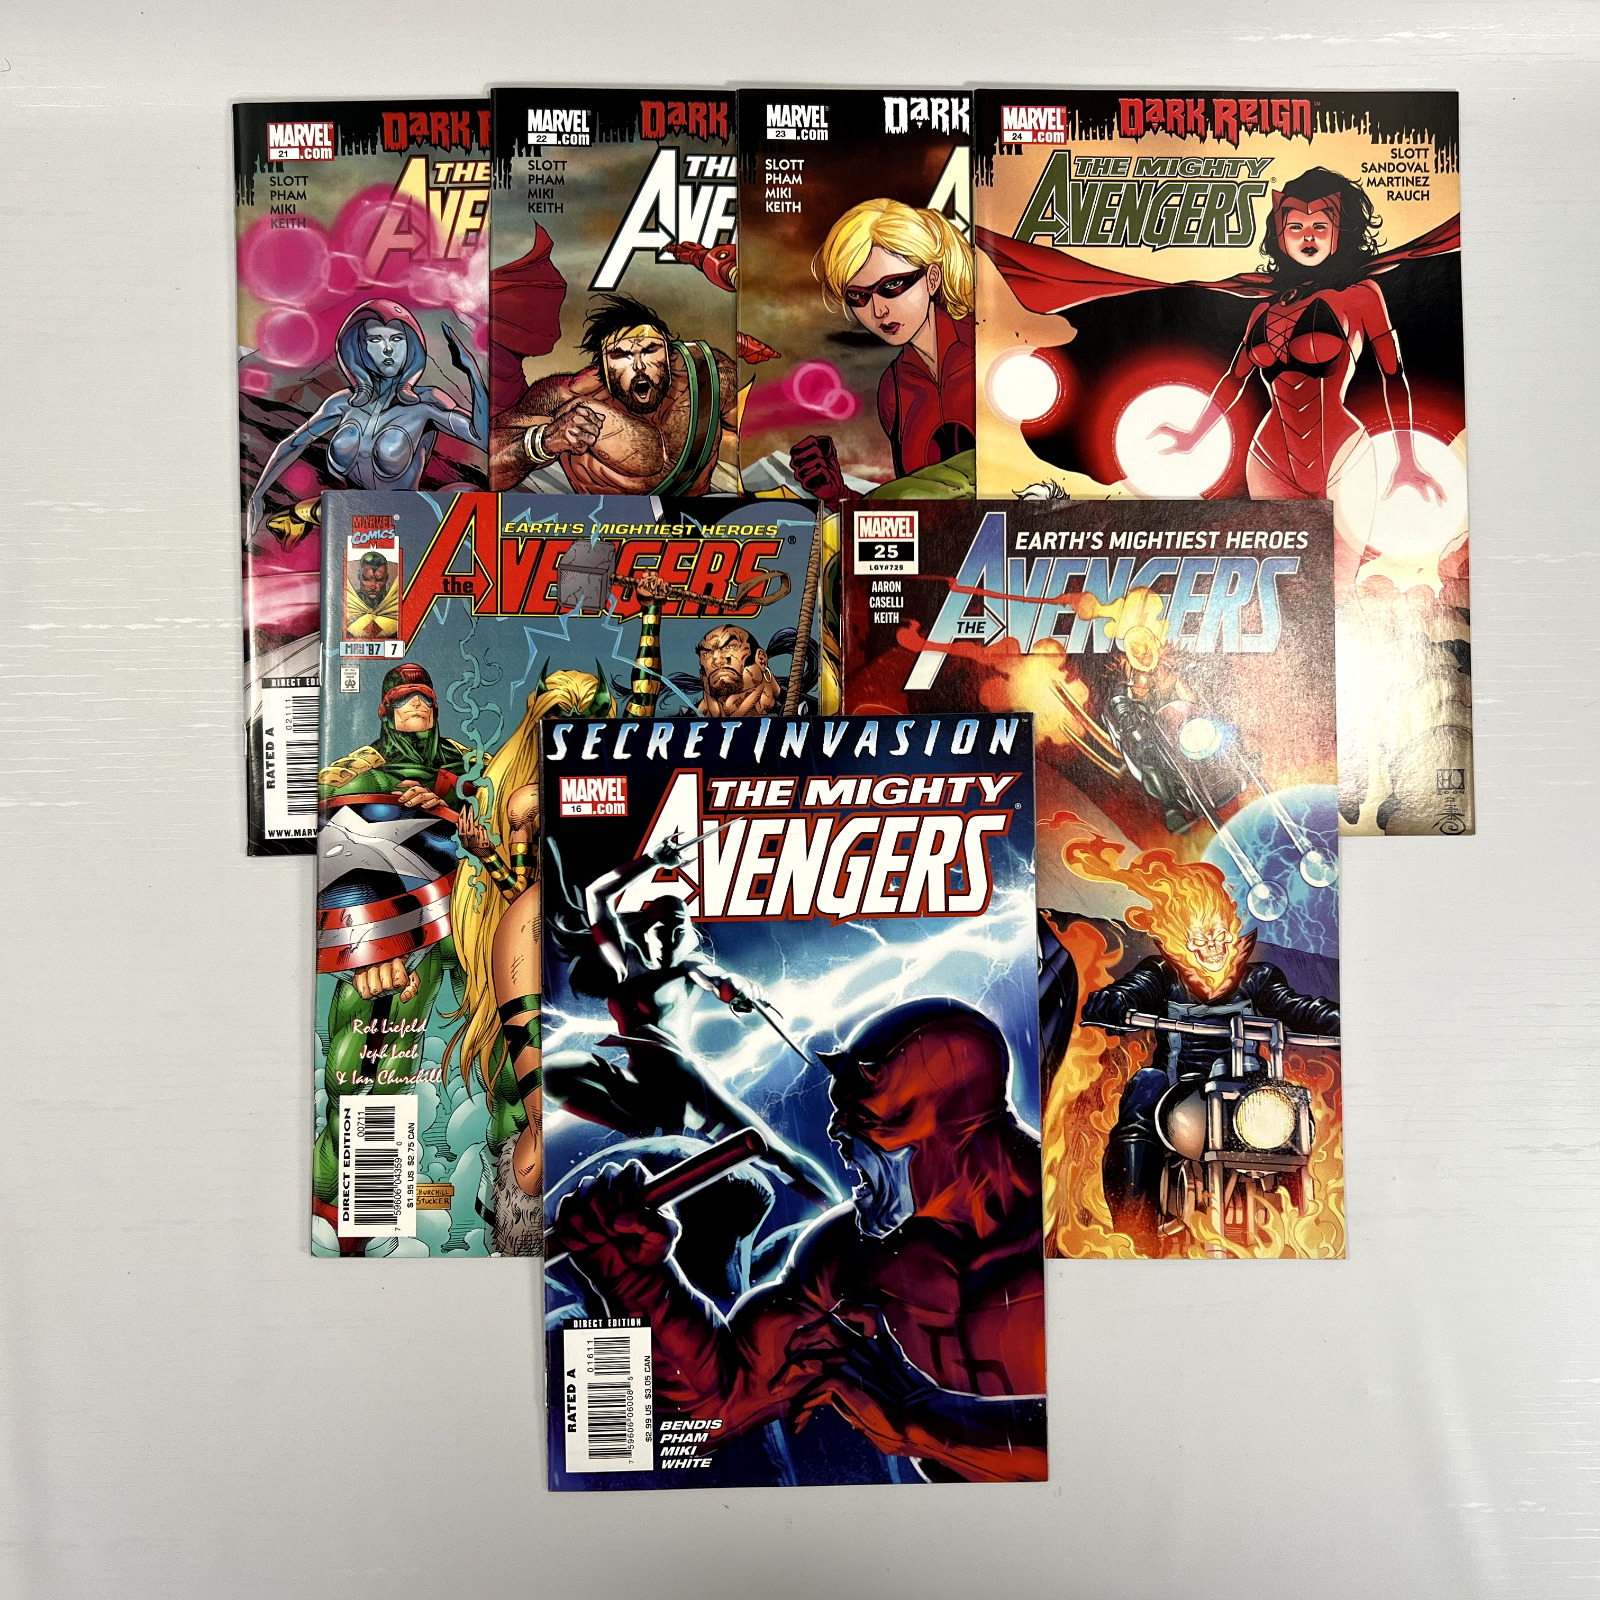 Mixed Lot of 7 AVENGERS Vol 2 #7  Vol 8 # 25  MIGHTY AVENGERS 16 21-24 High Gr.